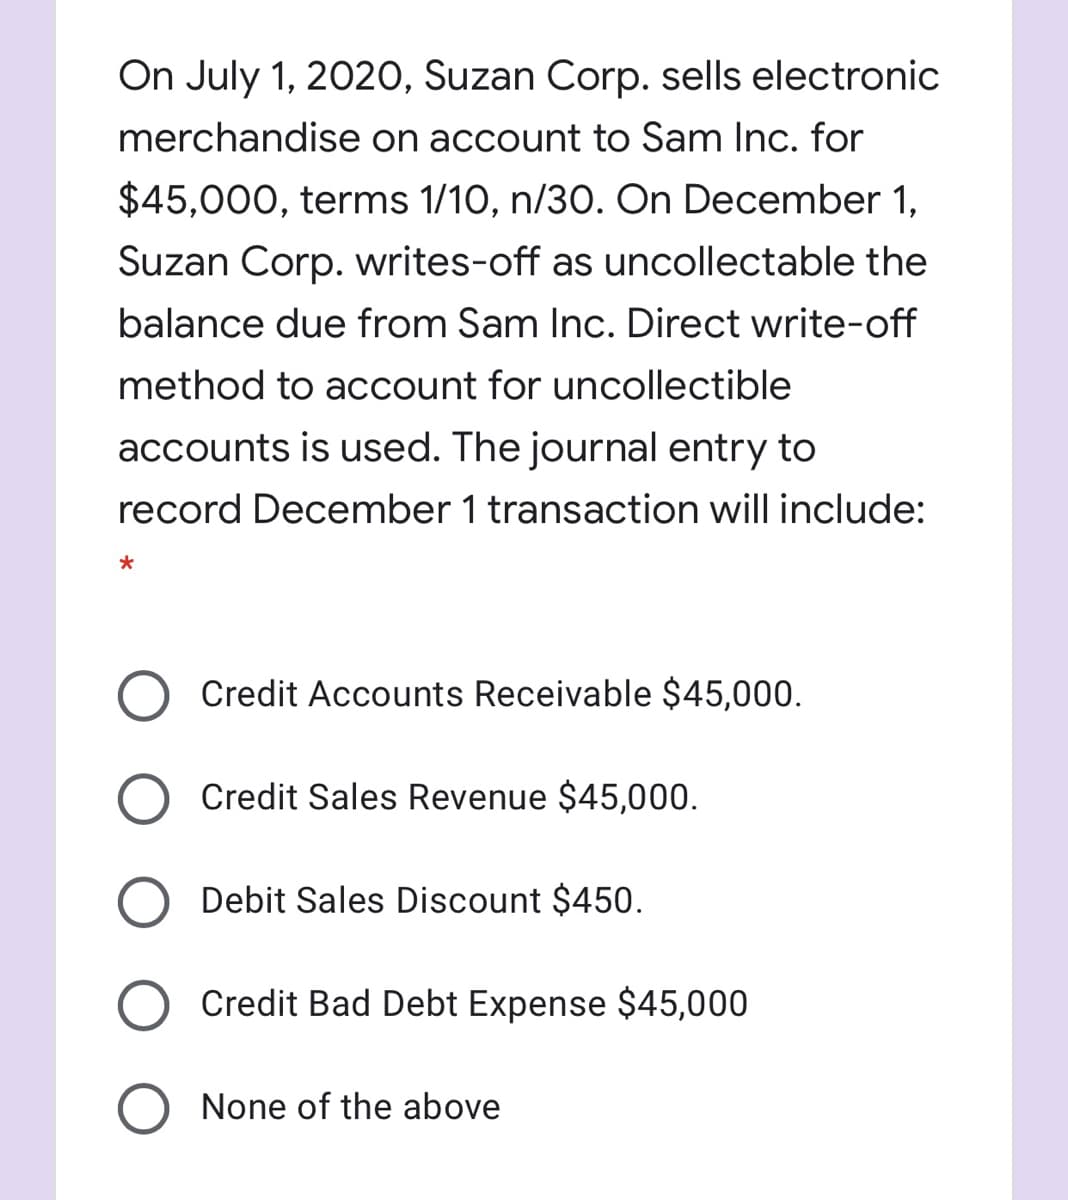 On July 1, 2020, Suzan Corp. sells electronic
merchandise on account to Sam Inc. for
$45,000, terms 1/10, n/30. On December 1,
Suzan Corp. writes-off as uncollectable the
balance due from Sam Inc. Direct write-off
method to account for uncollectible
accounts is used. The journal entry to
record December 1 transaction will include:
Credit Accounts Receivable $45,000.
Credit Sales Revenue $45,000.
Debit Sales Discount $450.
Credit Bad Debt Expense $45,000
None of the above
